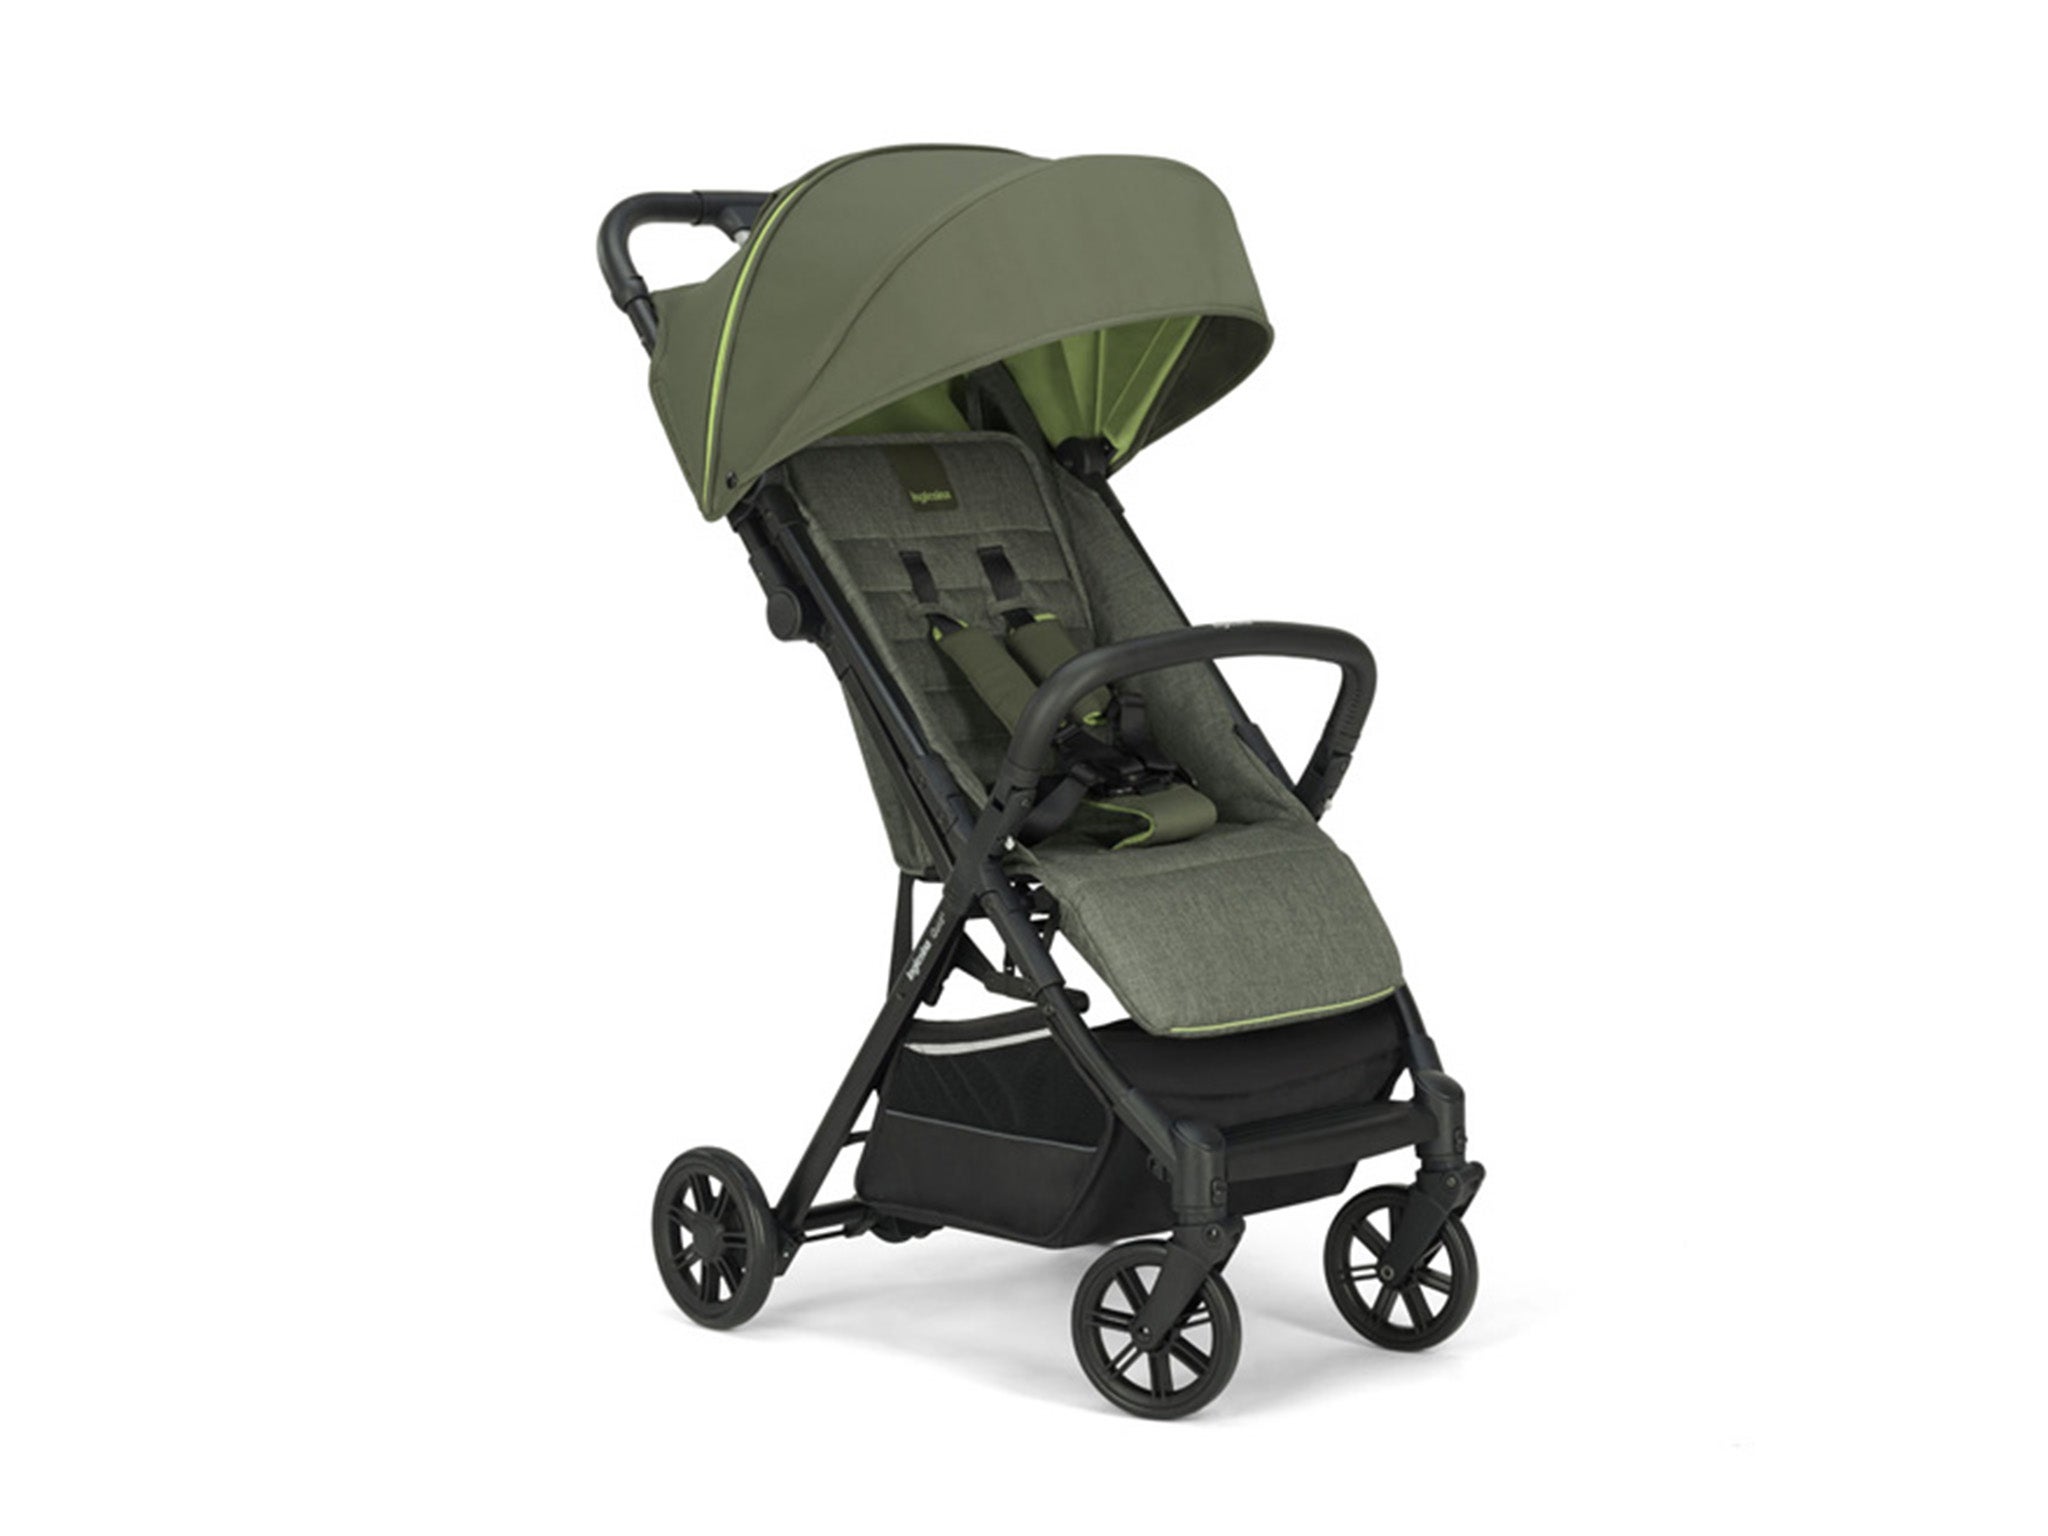 best compact stroller indybest review Inglesina quid 2.